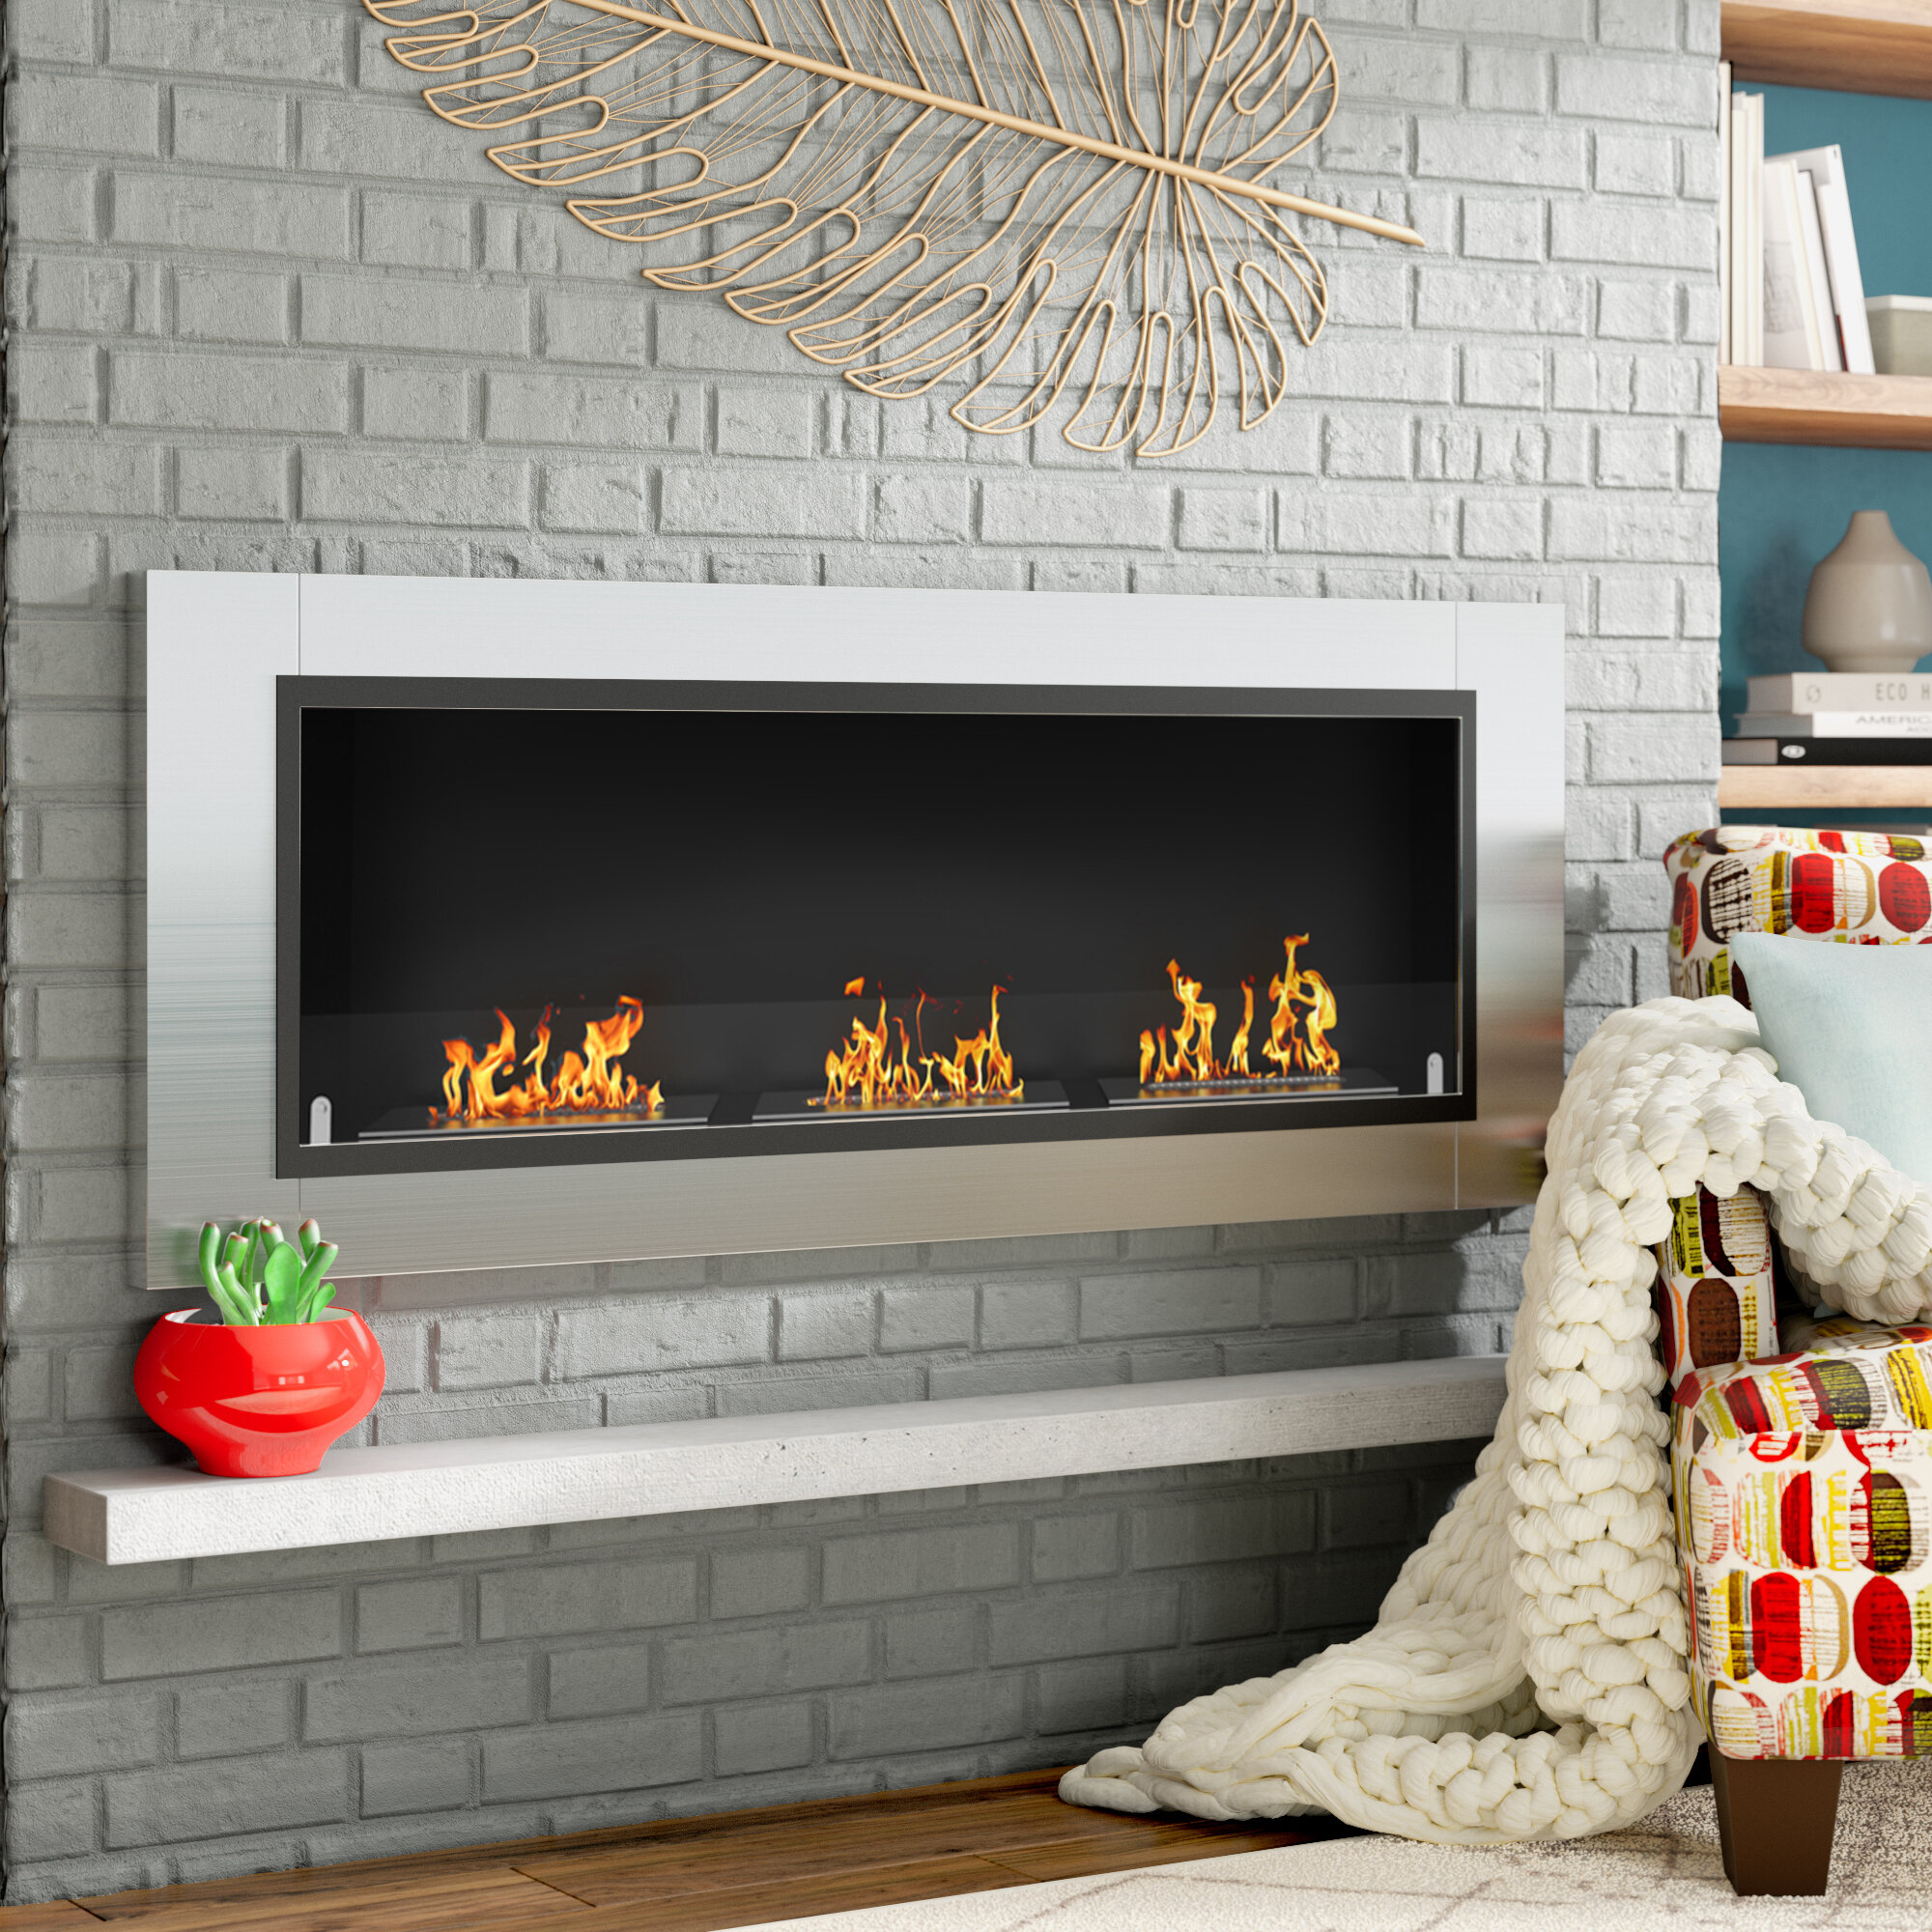 6 Bio-ethanol Fireplaces for Winter